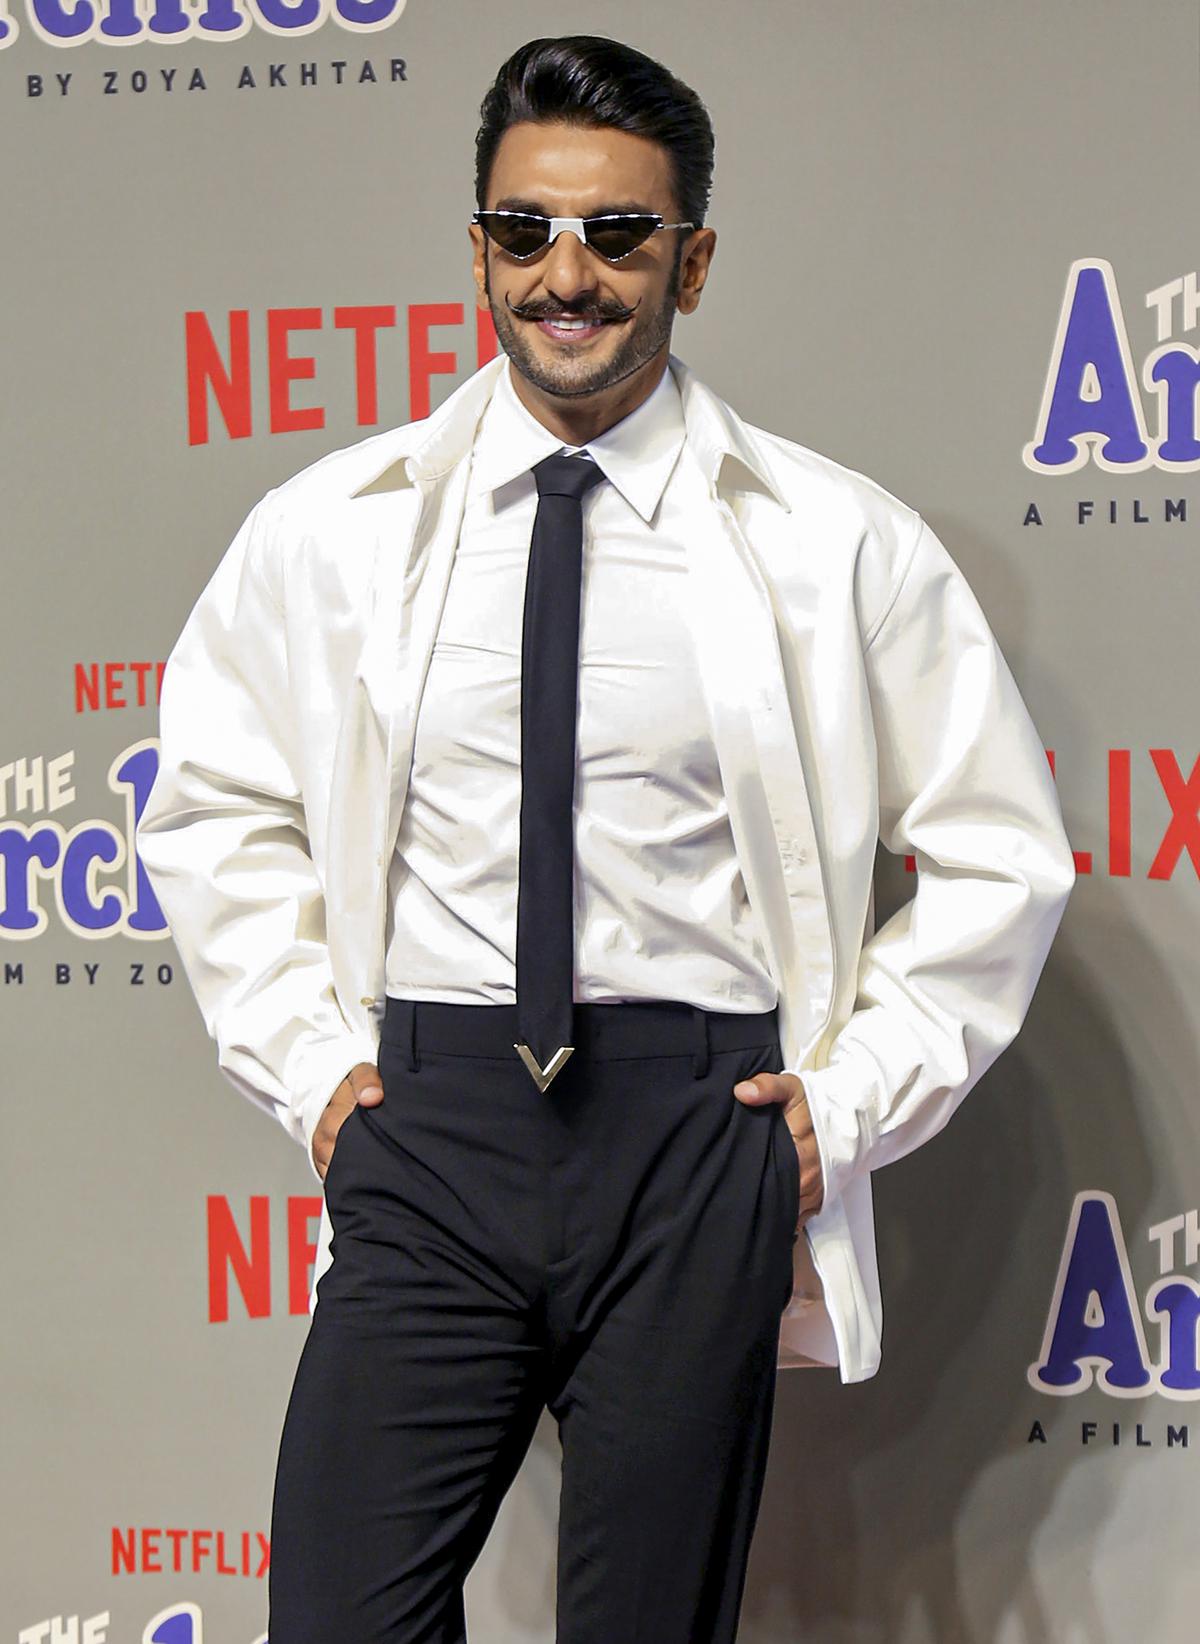 Mumbai: Actor Ranveer Singh poses for photos at the premiere of Netflix’s film ‘The Archies’, in Mumbai, Tuesday, Dec. 5, 2023.